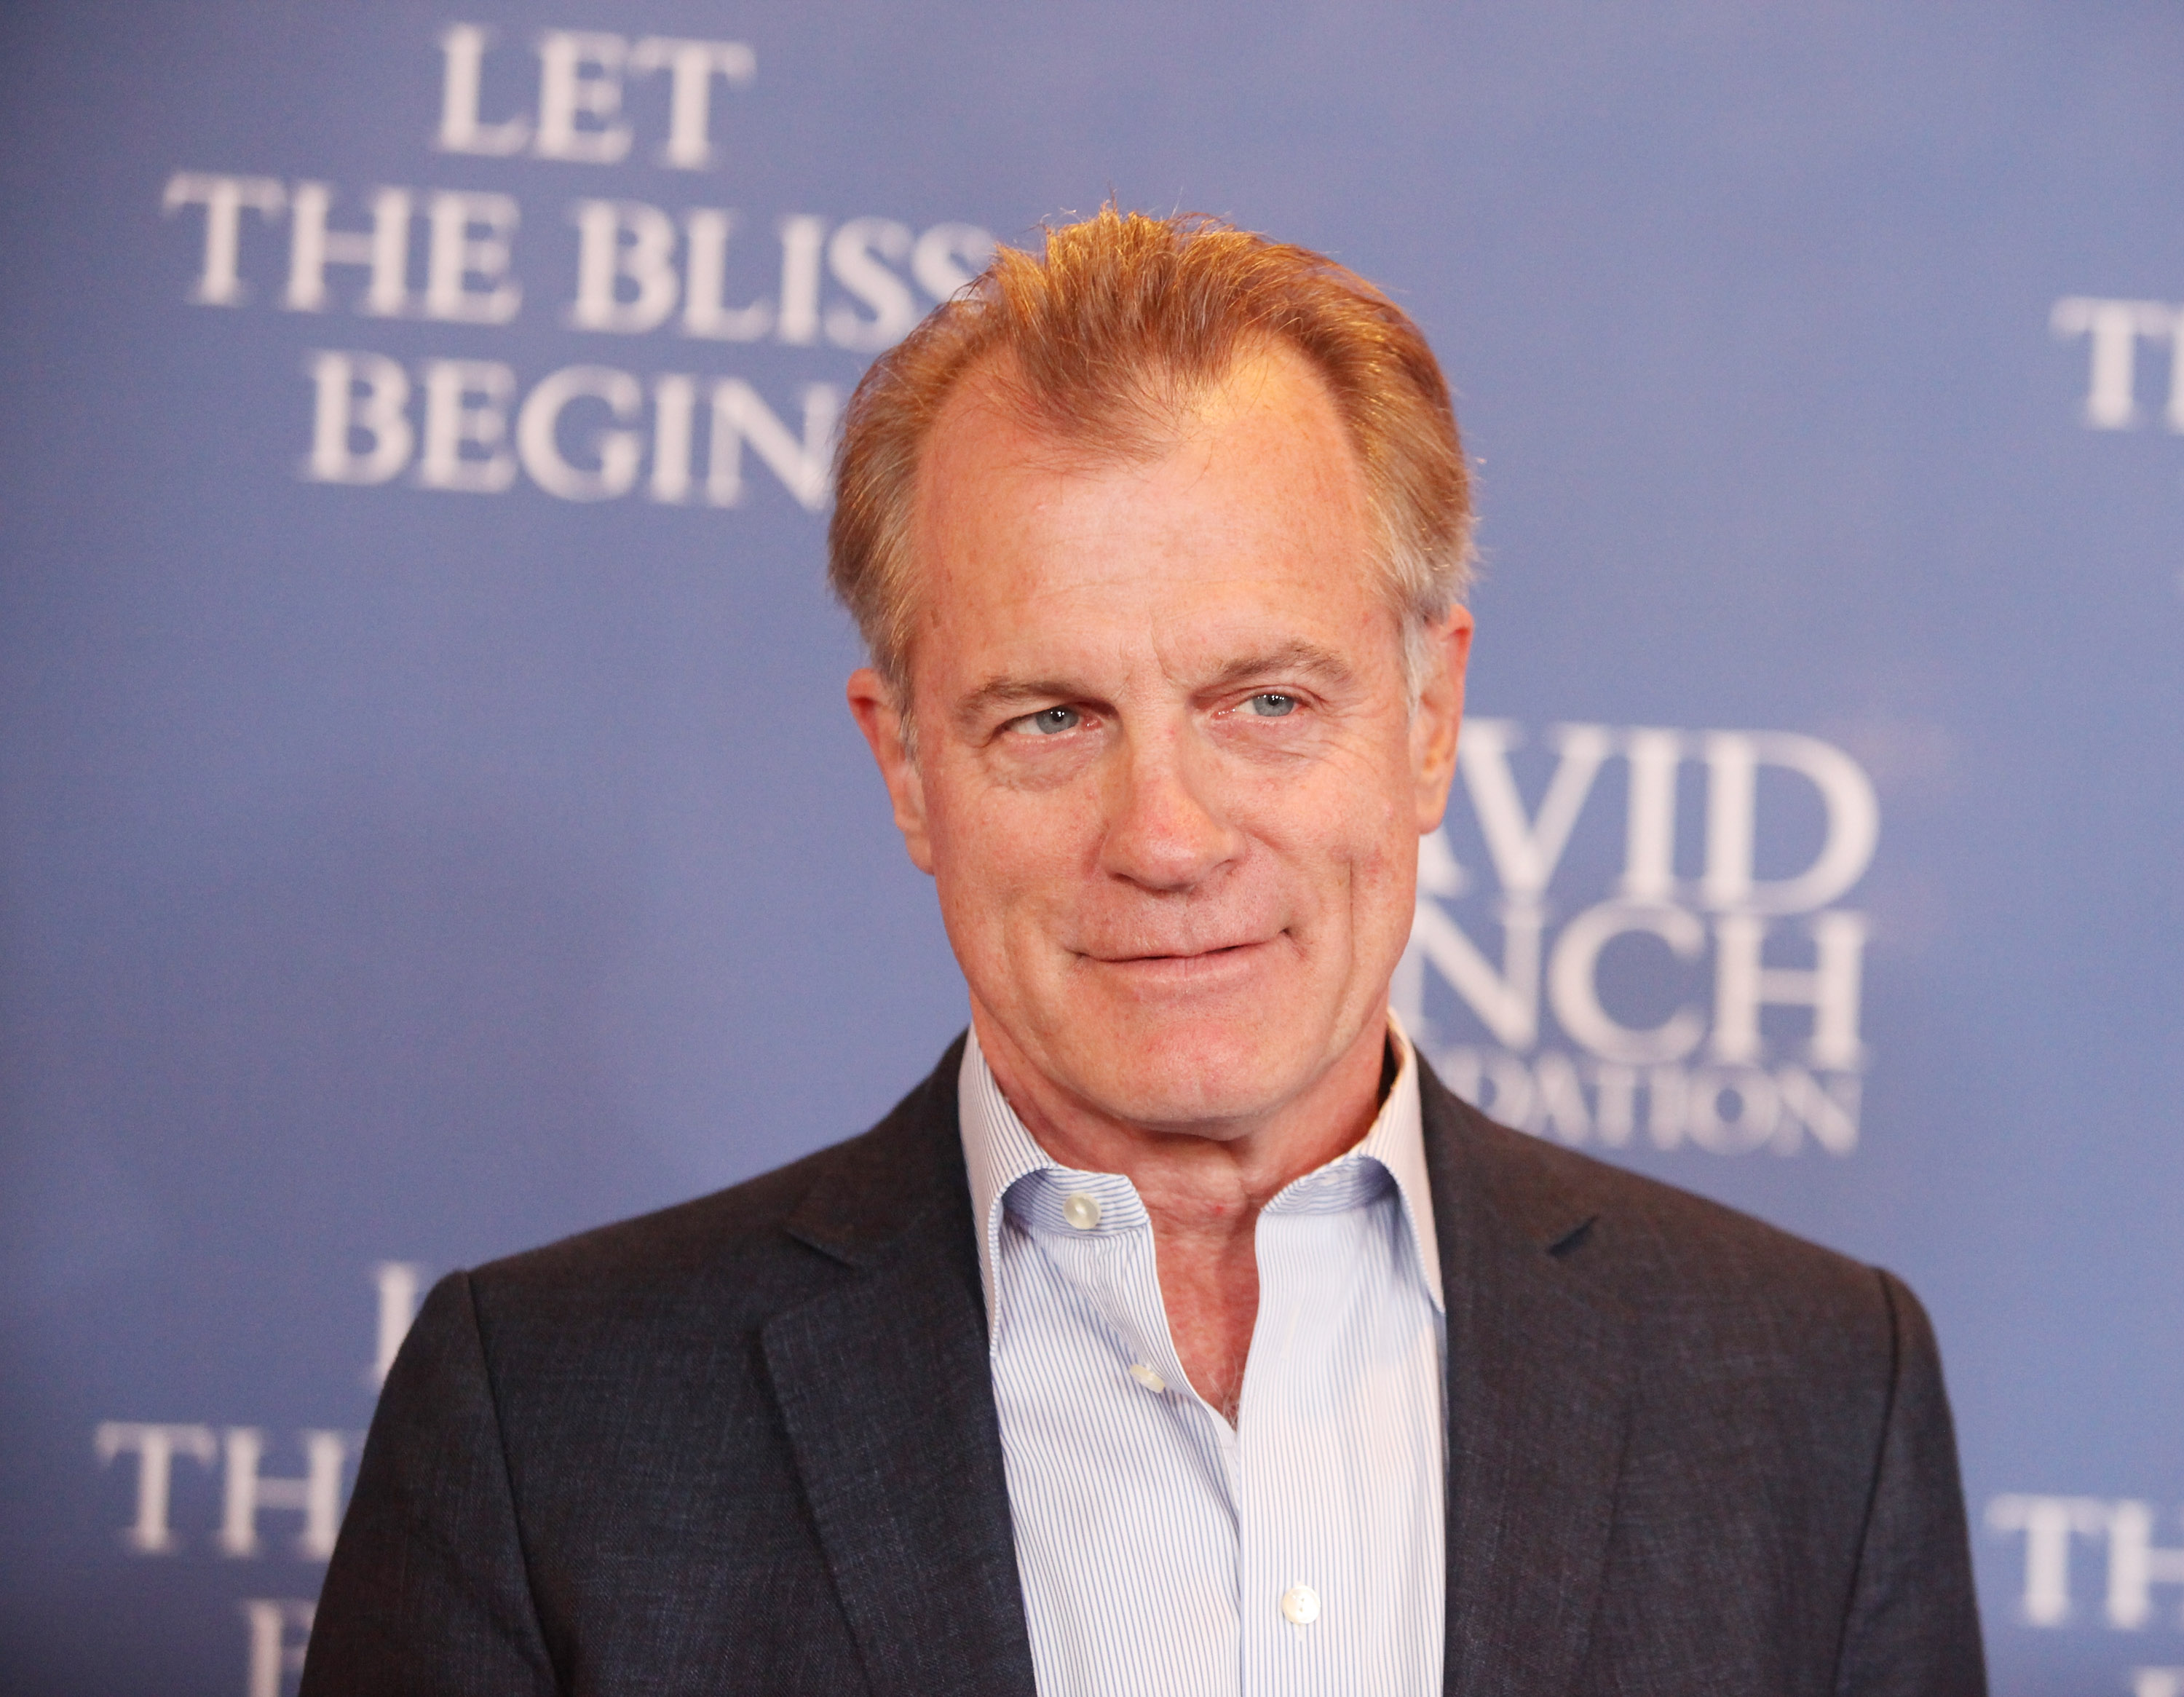 Stephen Collins arrives at The David Lynch Foundation hosts a "Night of Comedy" held at the Beverly Wilshire hotel in Beverly Hills, on June 30, 2012. (Michael Tran—FilmMagic/Getty Images)